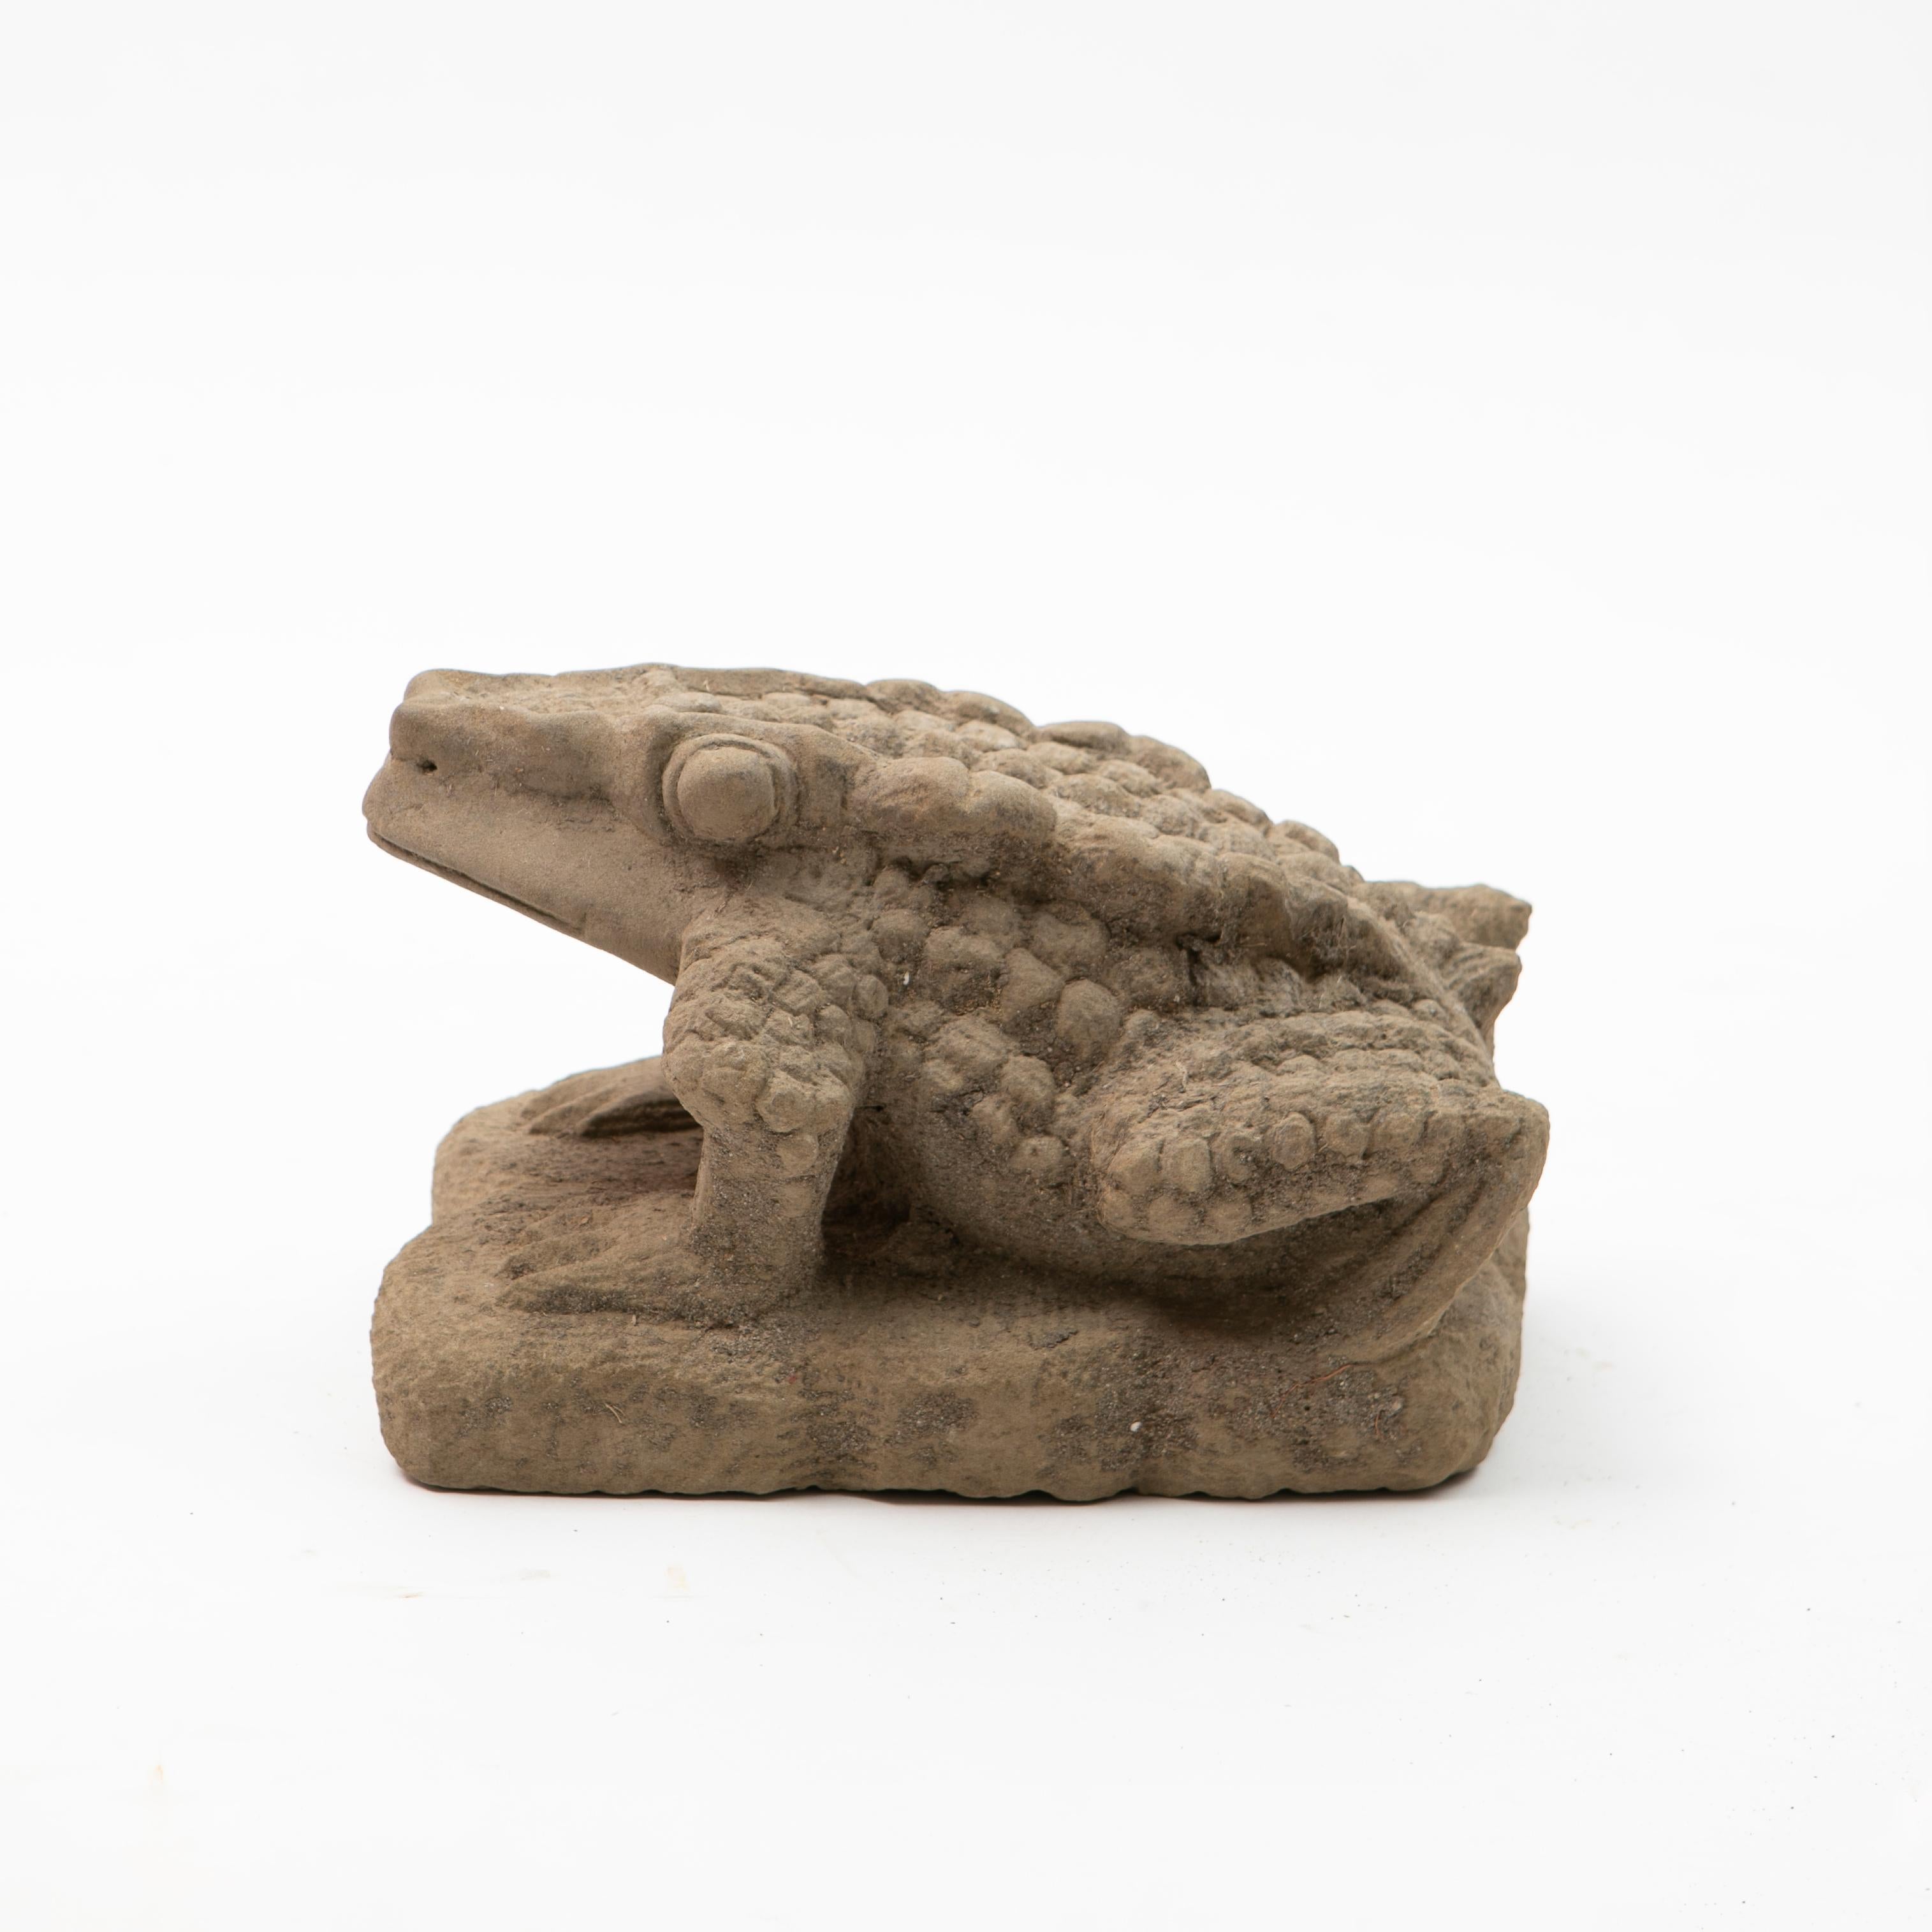 300-400 old Burmese carved sandstone sculpture depicting a frog.
From pagoda / temple in Burma, 17-18th century.

From the estate of a Danish collector. 

Untouched and in original condition with great patina.